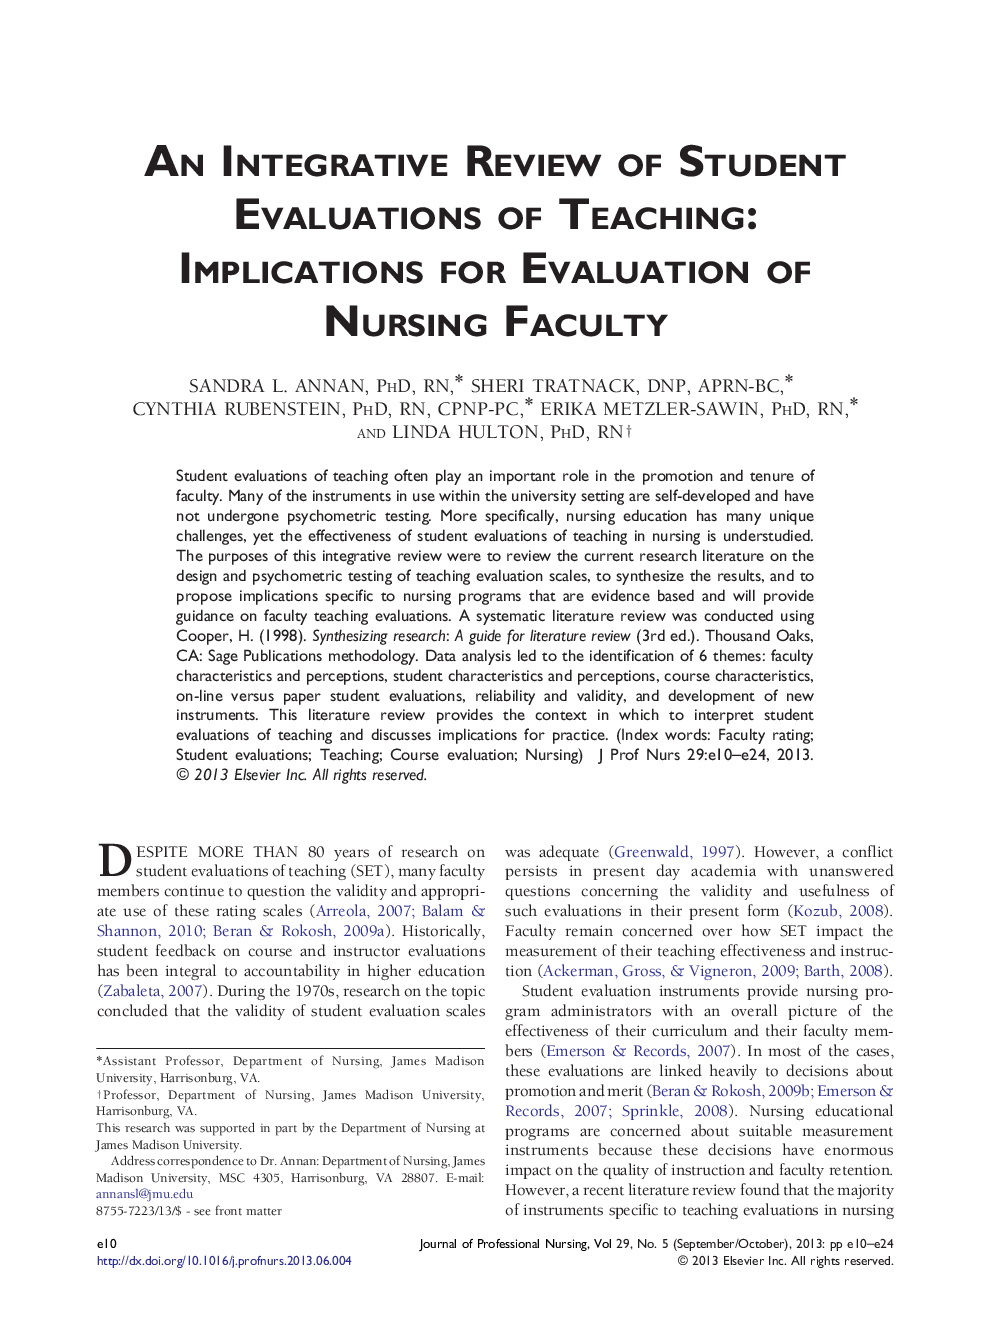 An Integrative Review of Student Evaluations of Teaching: Implications for Evaluation of Nursing Faculty 